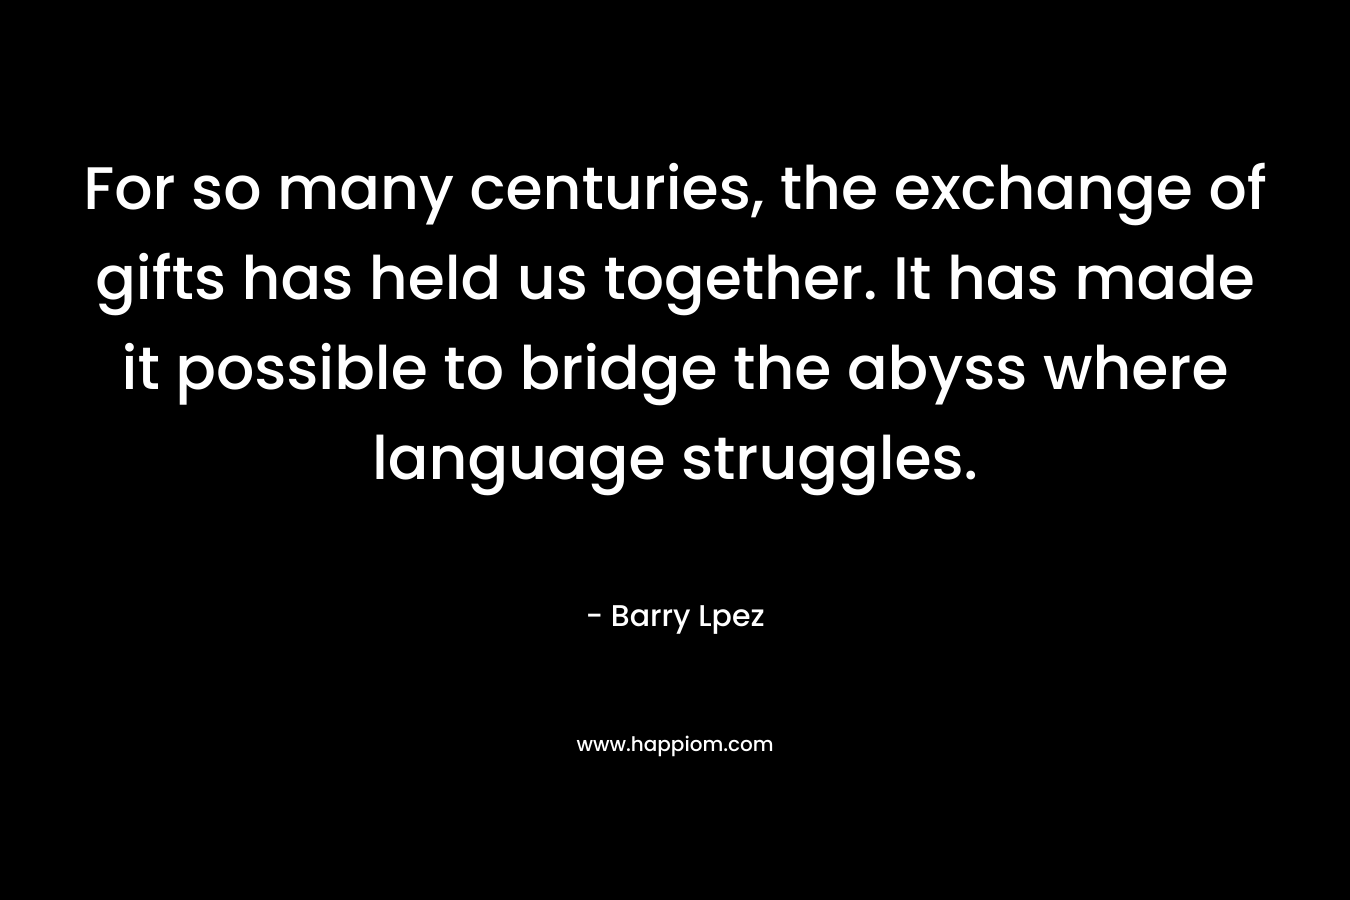 For so many centuries, the exchange of gifts has held us together. It has made it possible to bridge the abyss where language struggles.